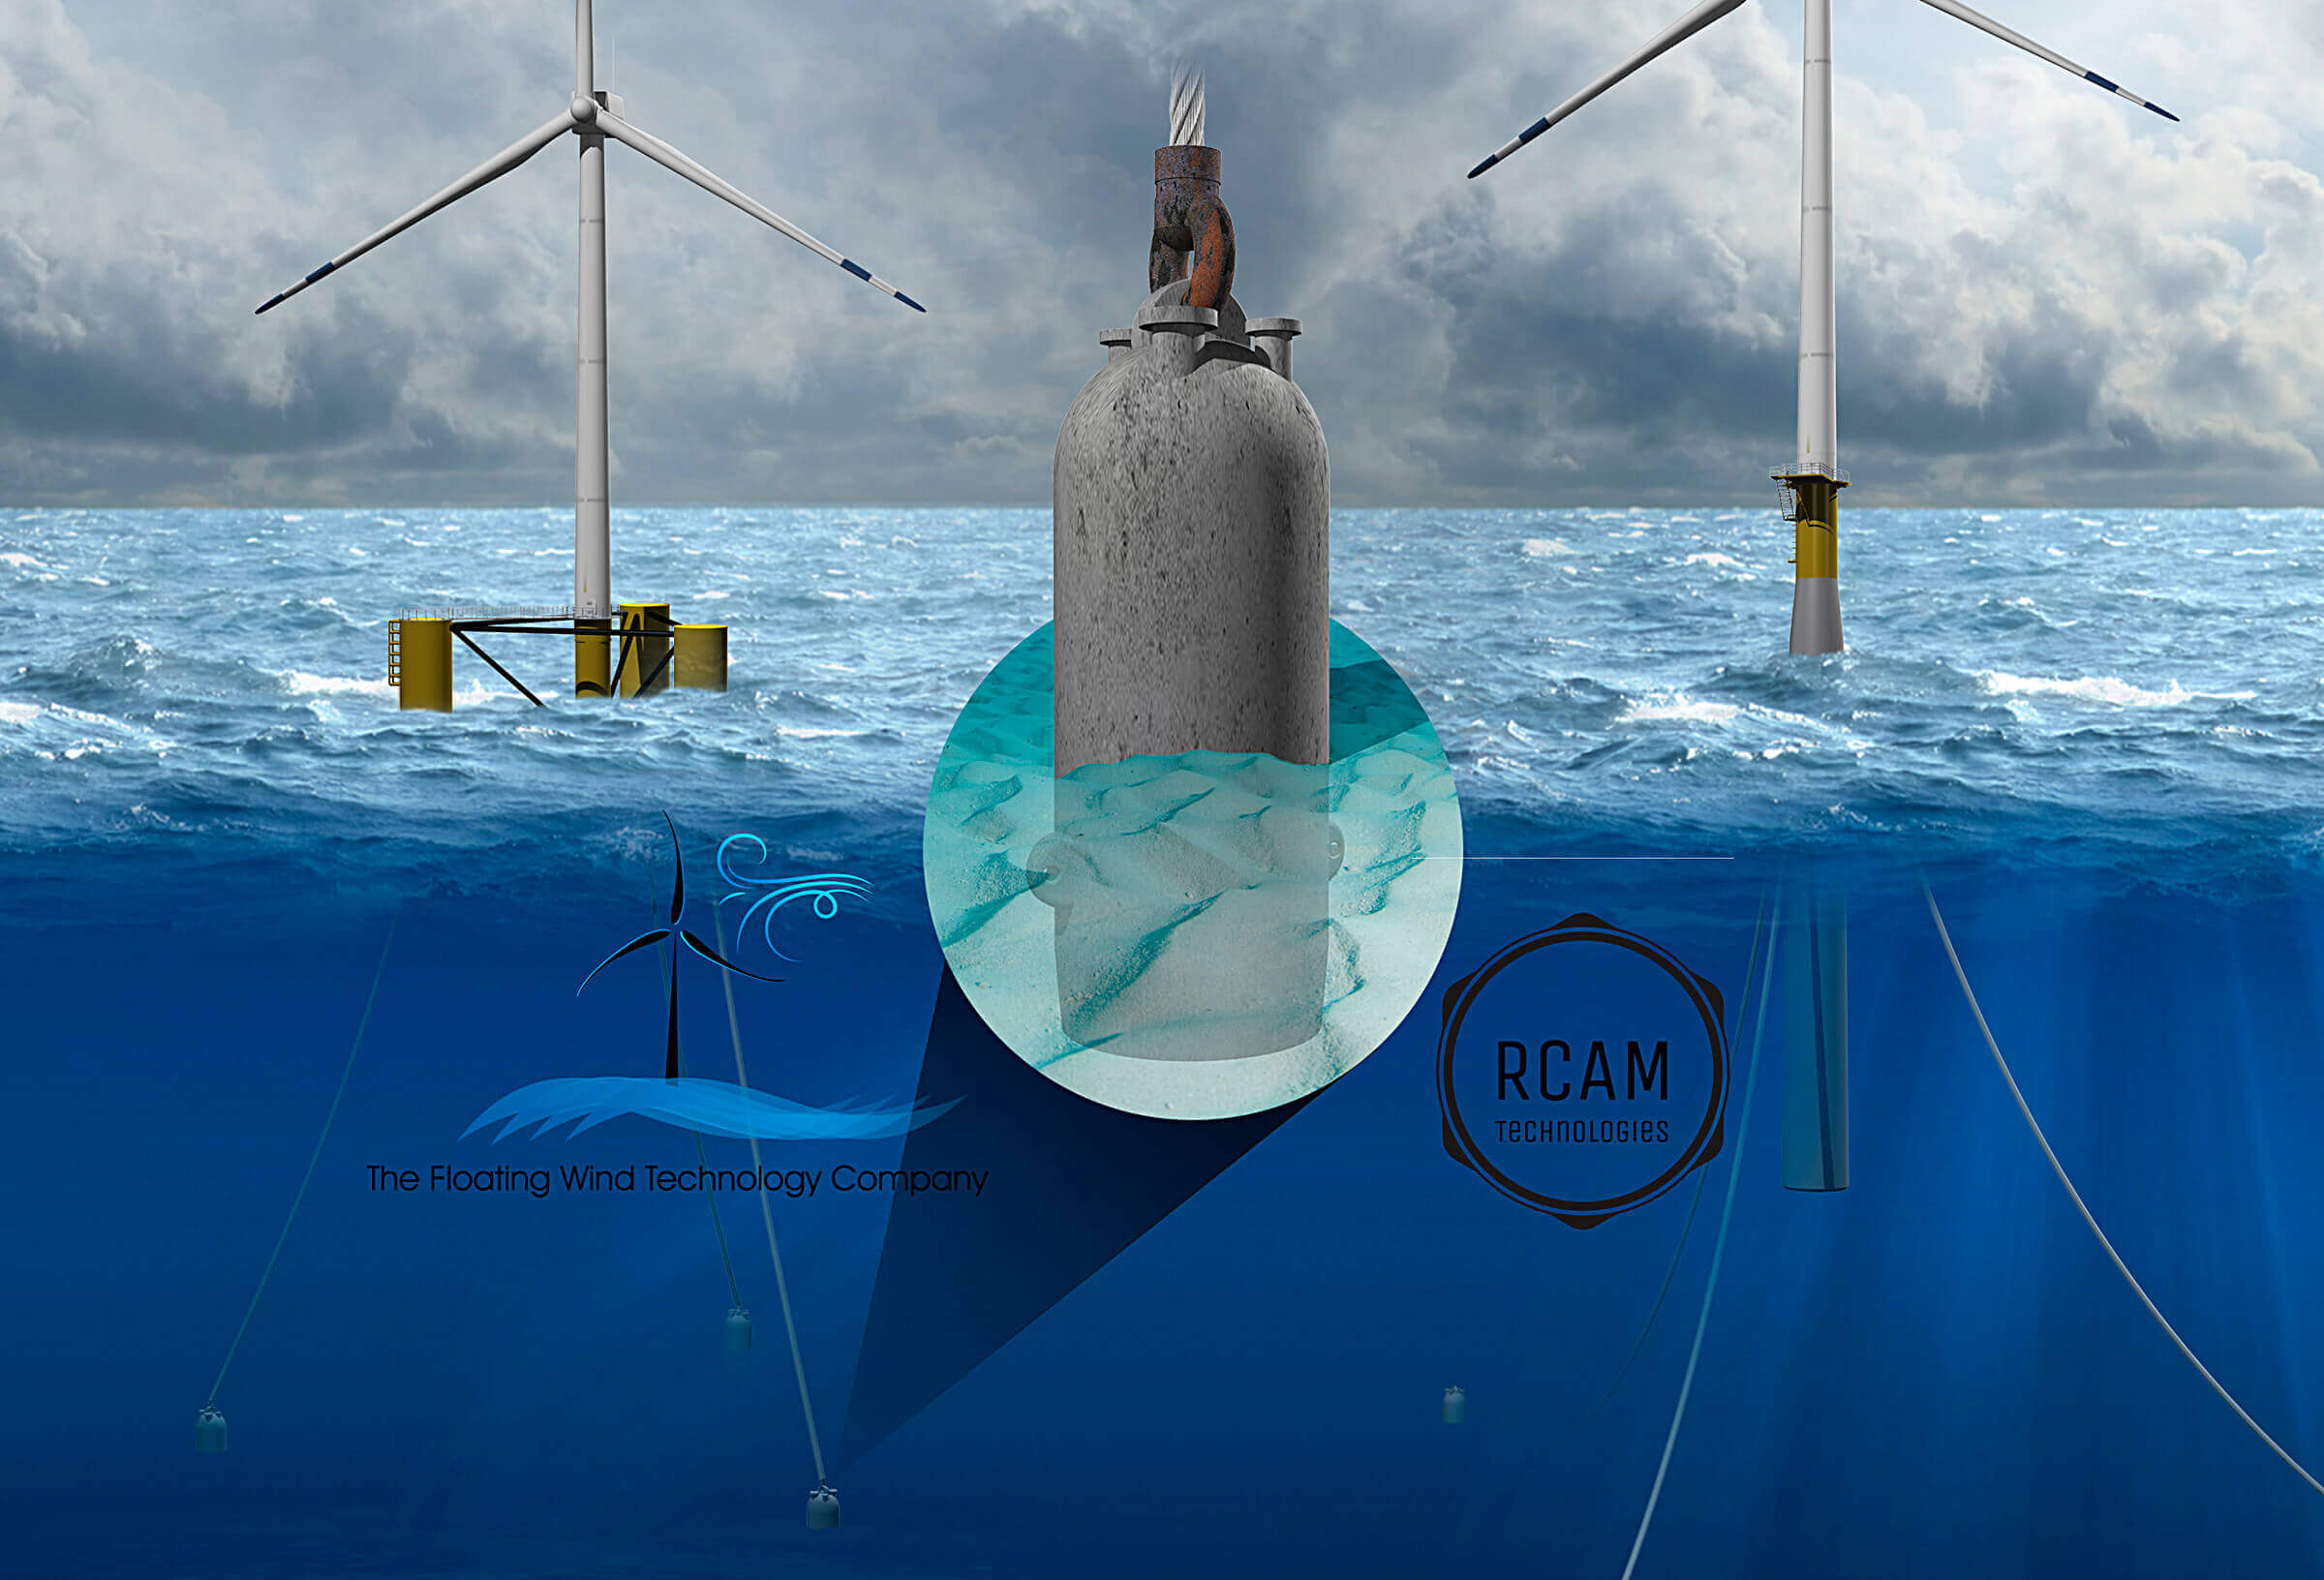 3D-printed concrete to help build offshore wind energy